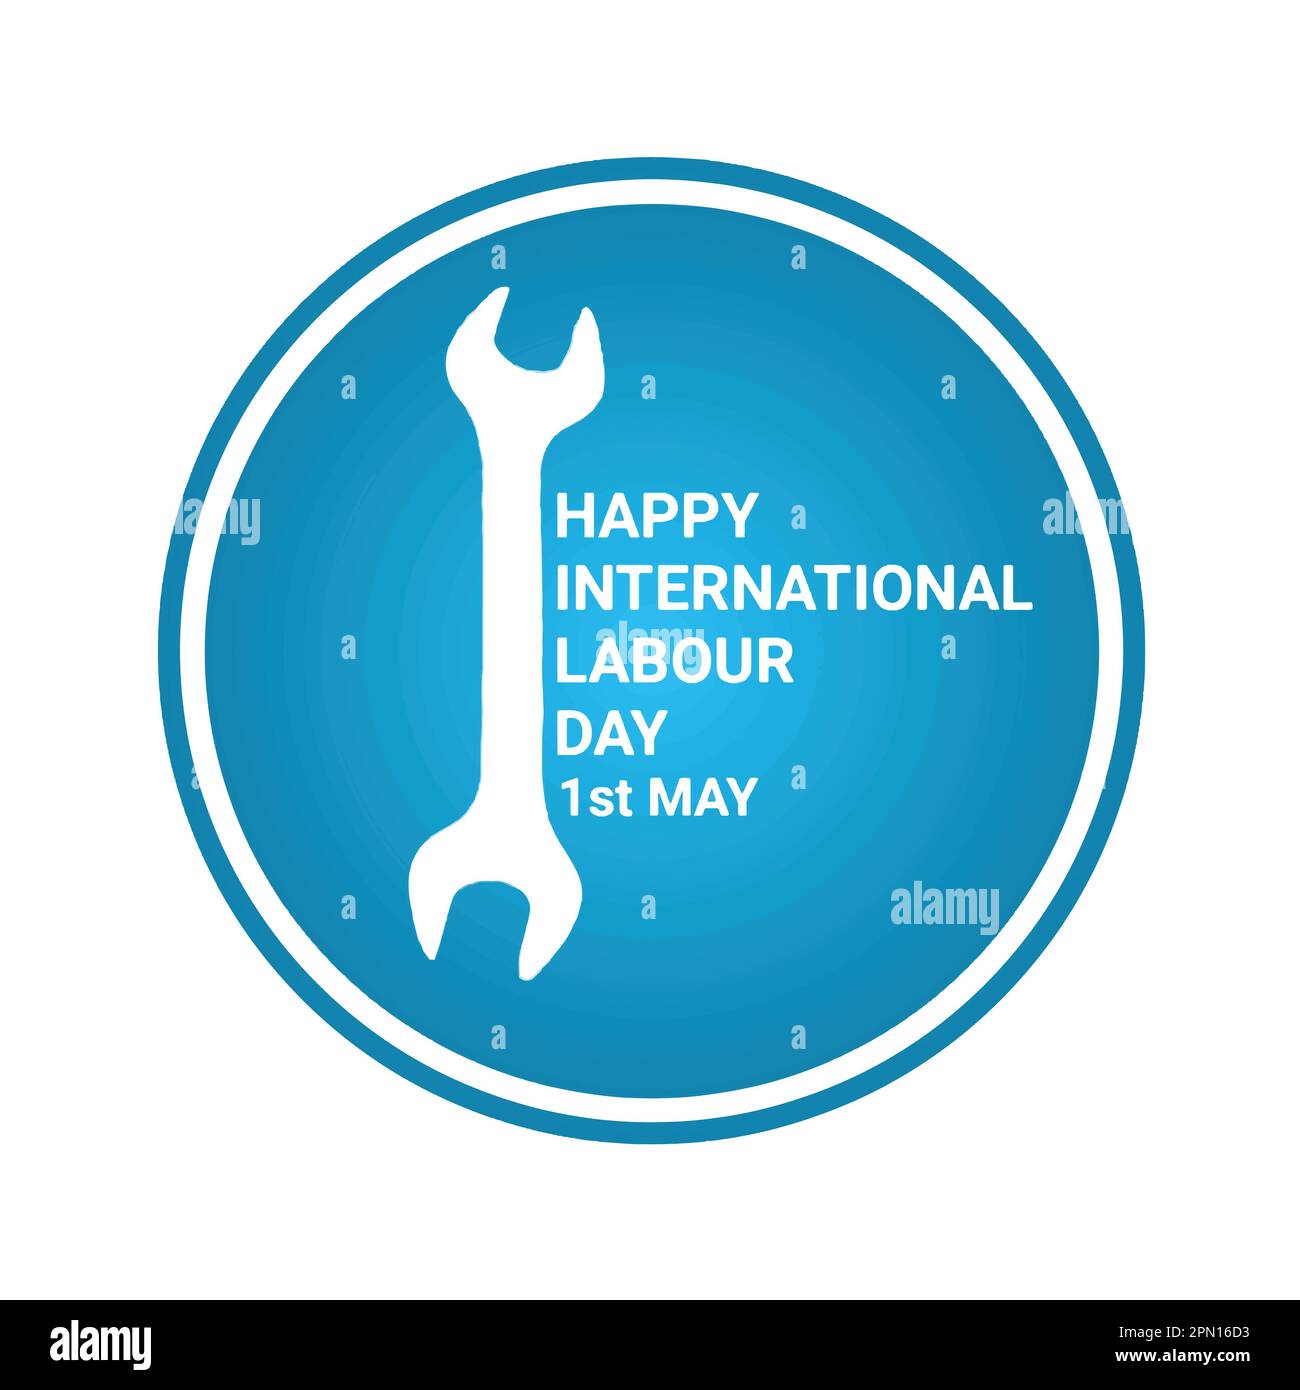 Happy International Labour Day. 1st May. Typography design on blue background. Vector illustration. Stock Vector